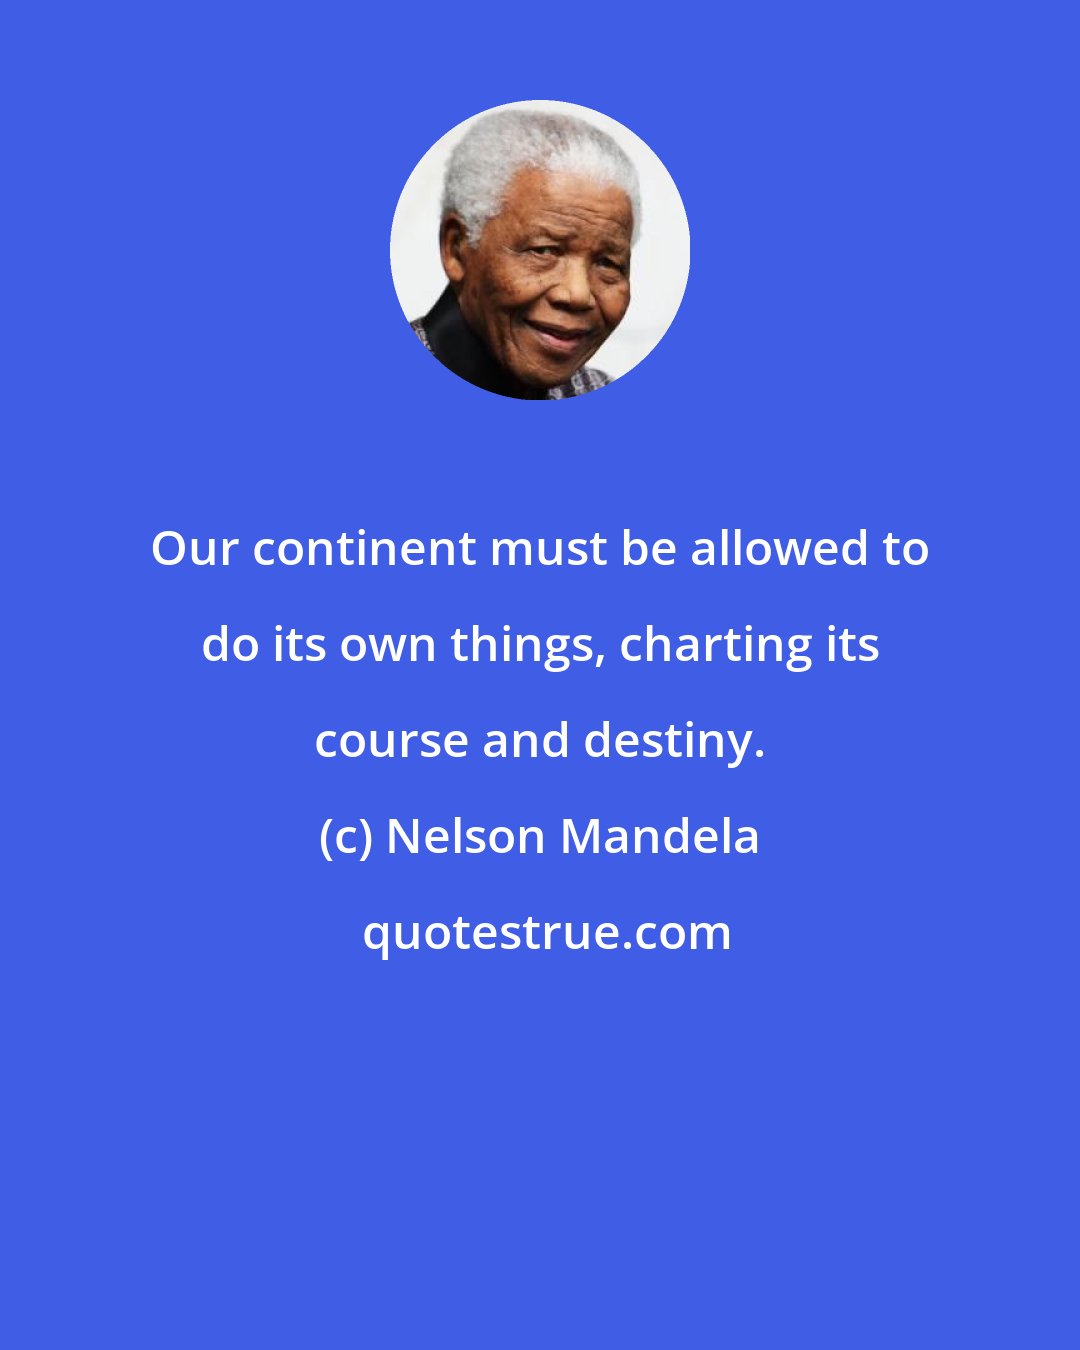 Nelson Mandela: Our continent must be allowed to do its own things, charting its course and destiny.